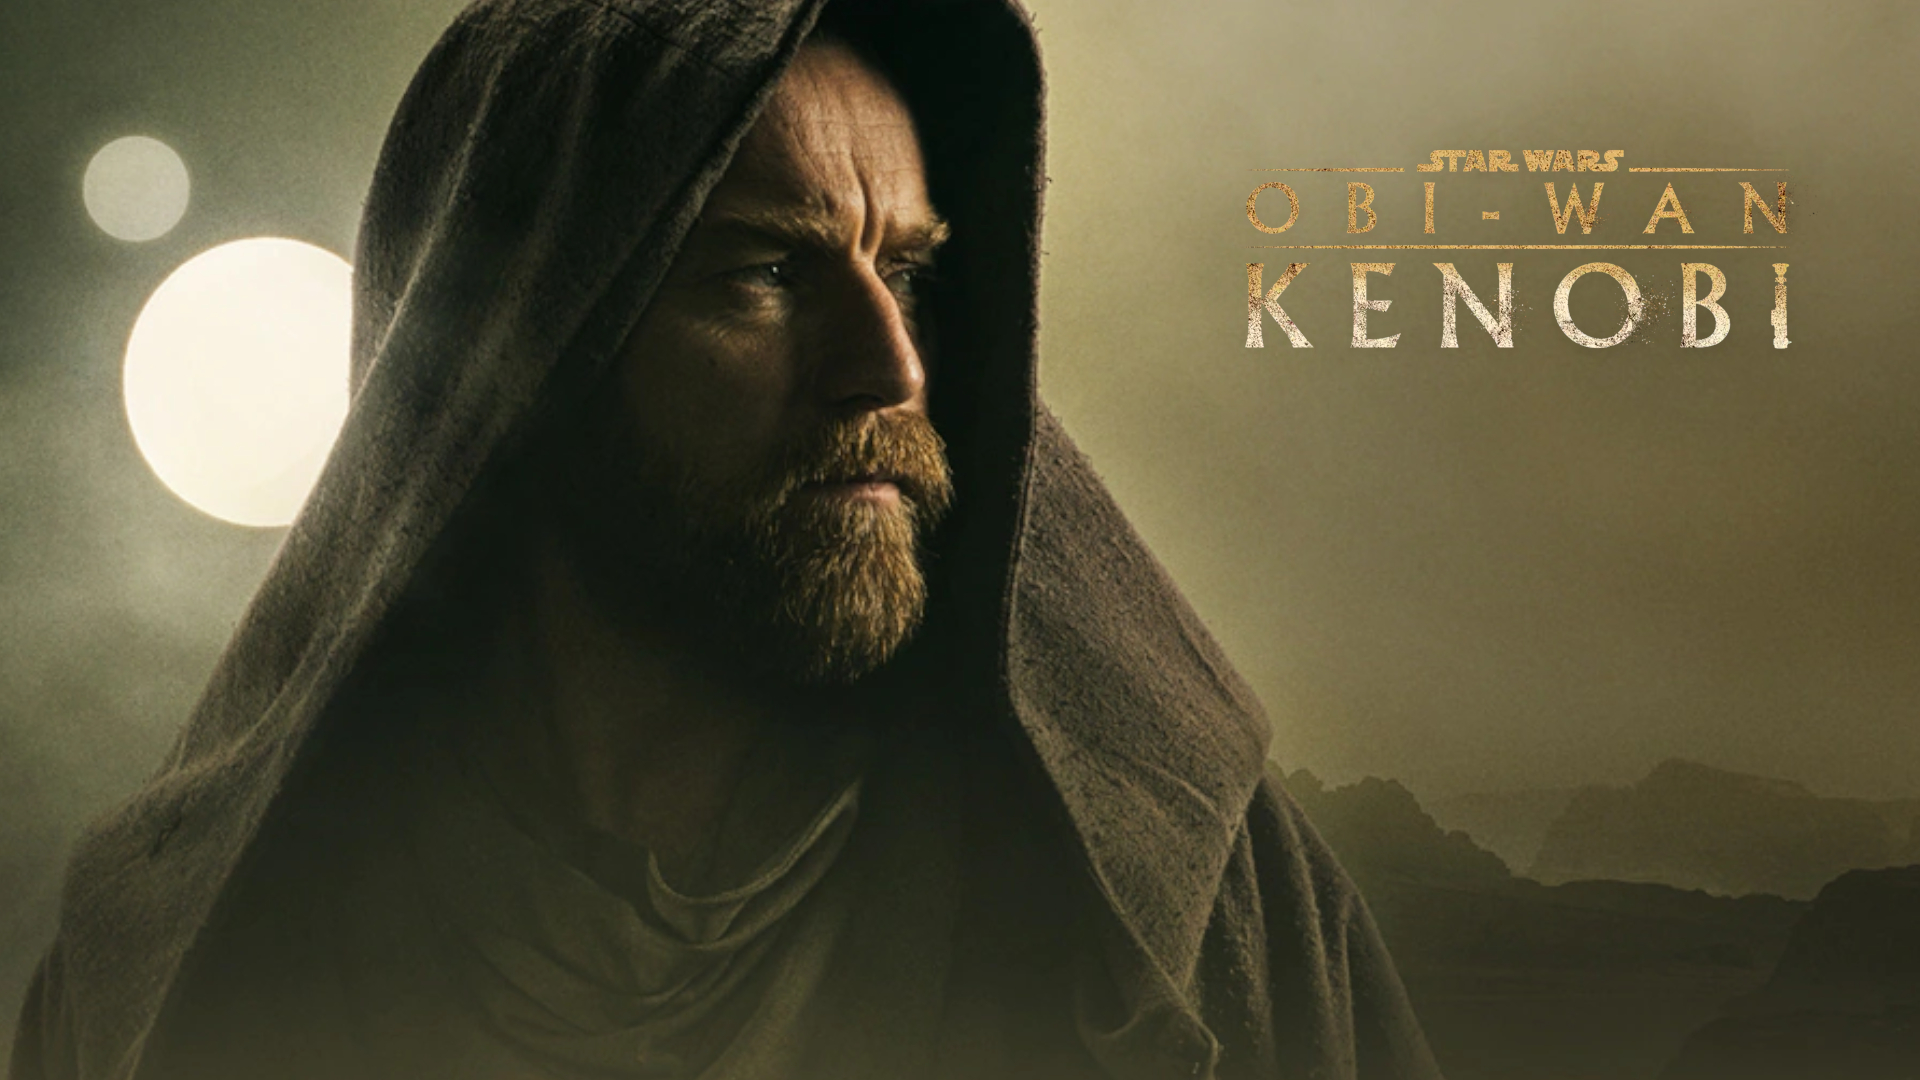 How to watch Obi-Wan Kenobi online and stream three episodes of the Star Wars show for less